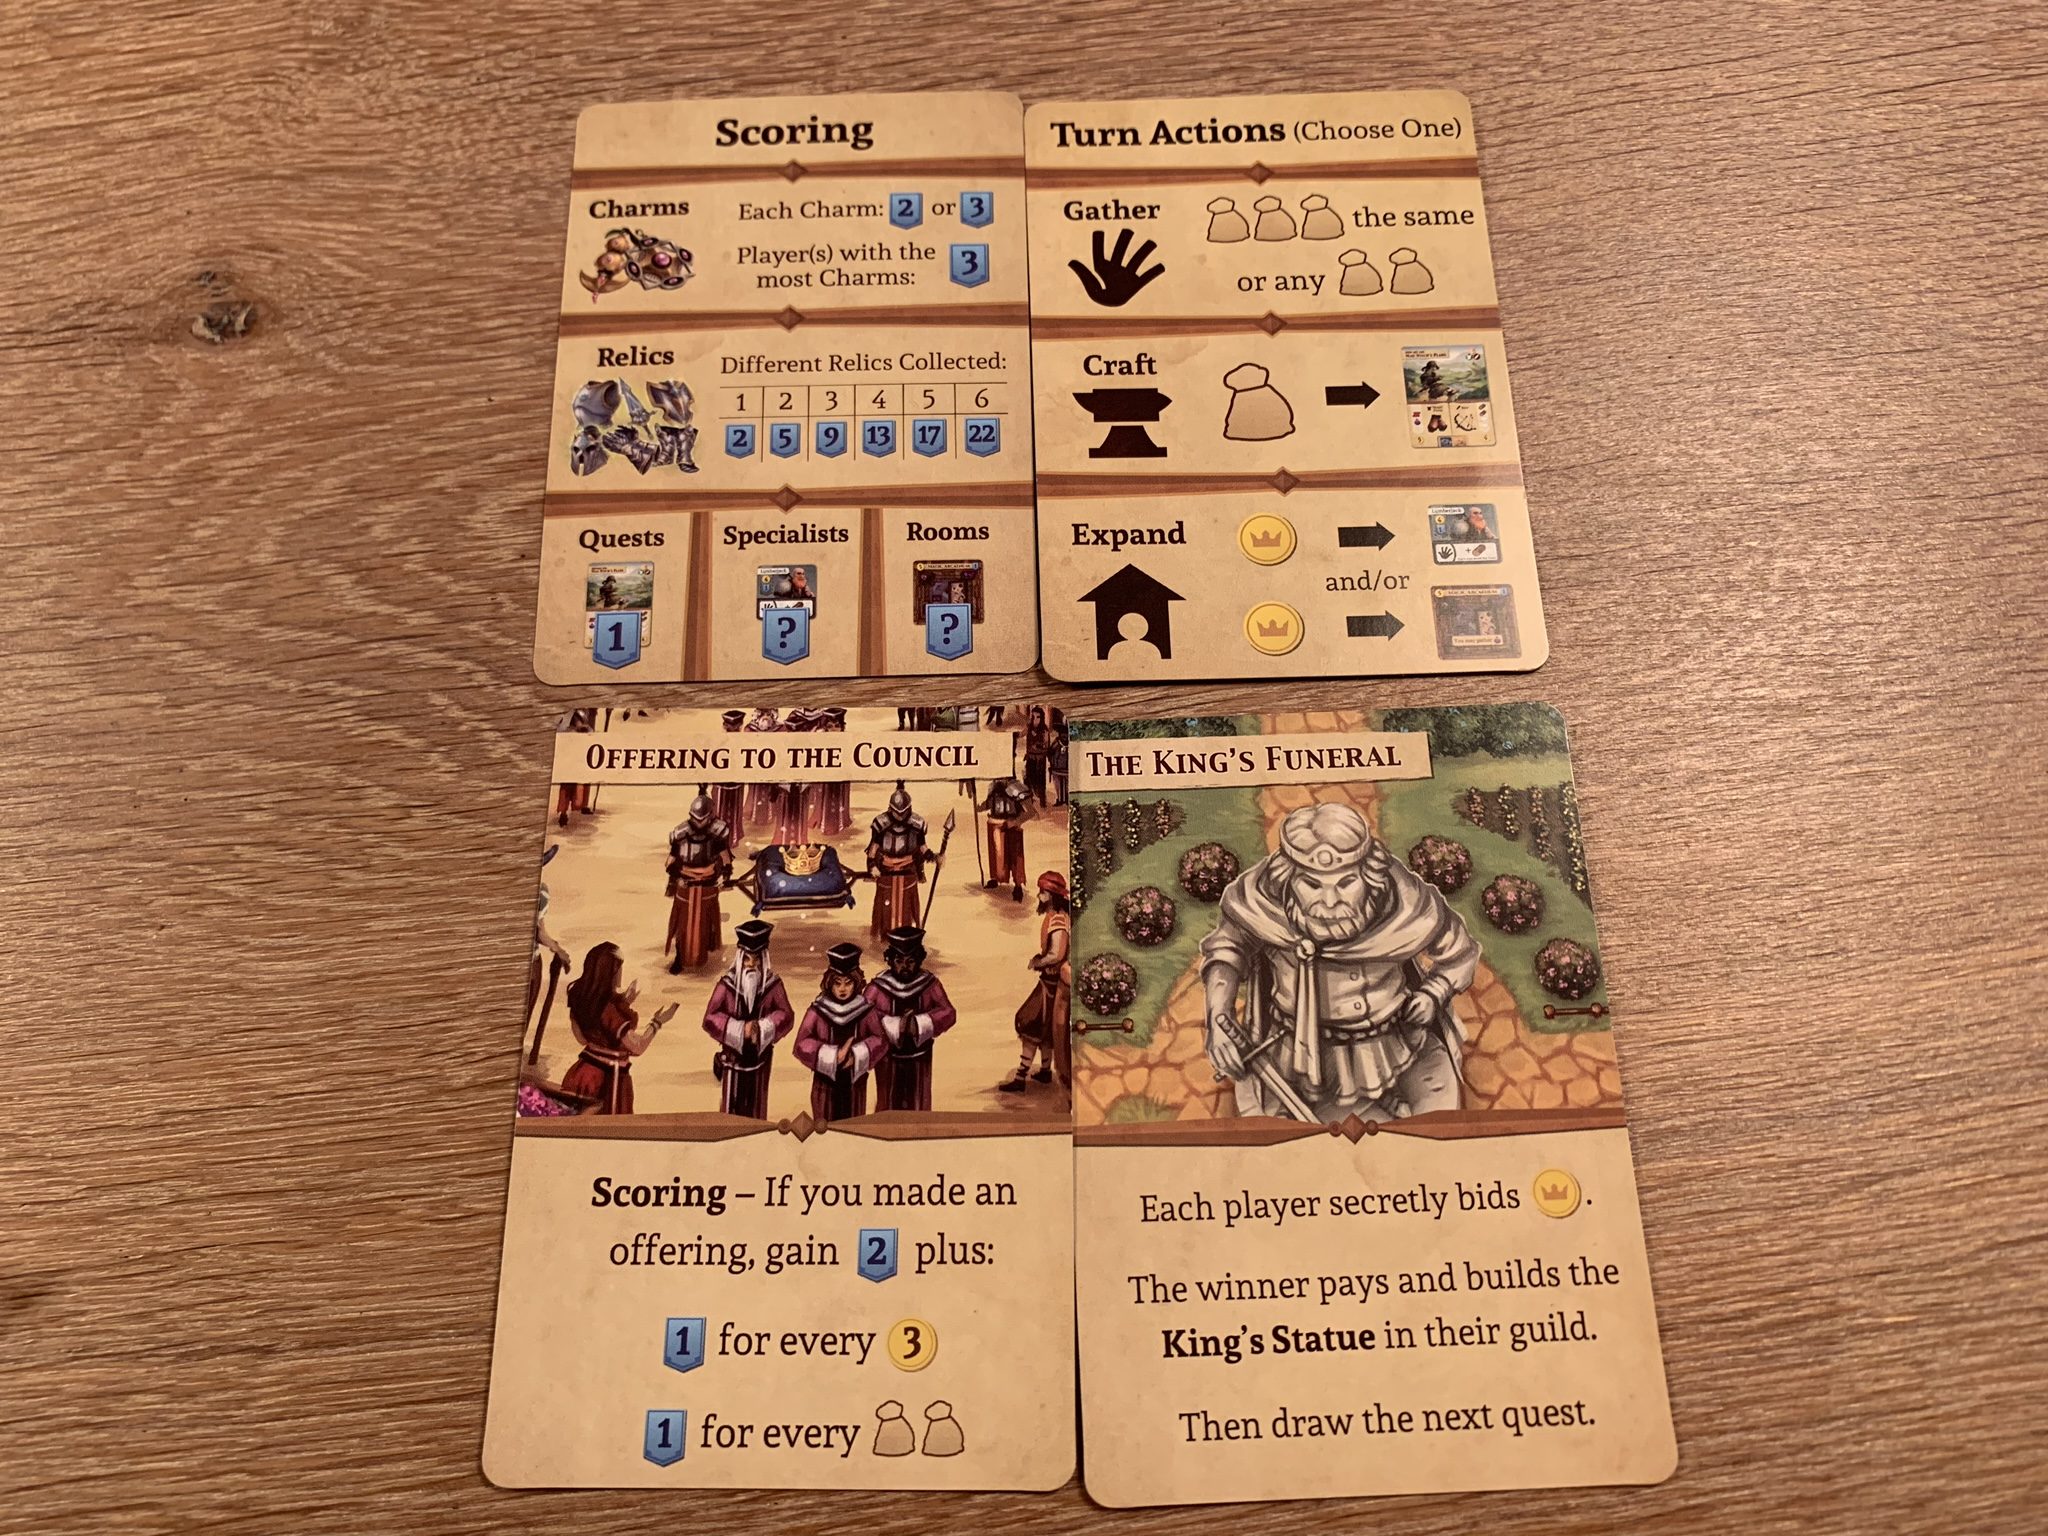 Quest cards, with the top ones being a 2 item quest